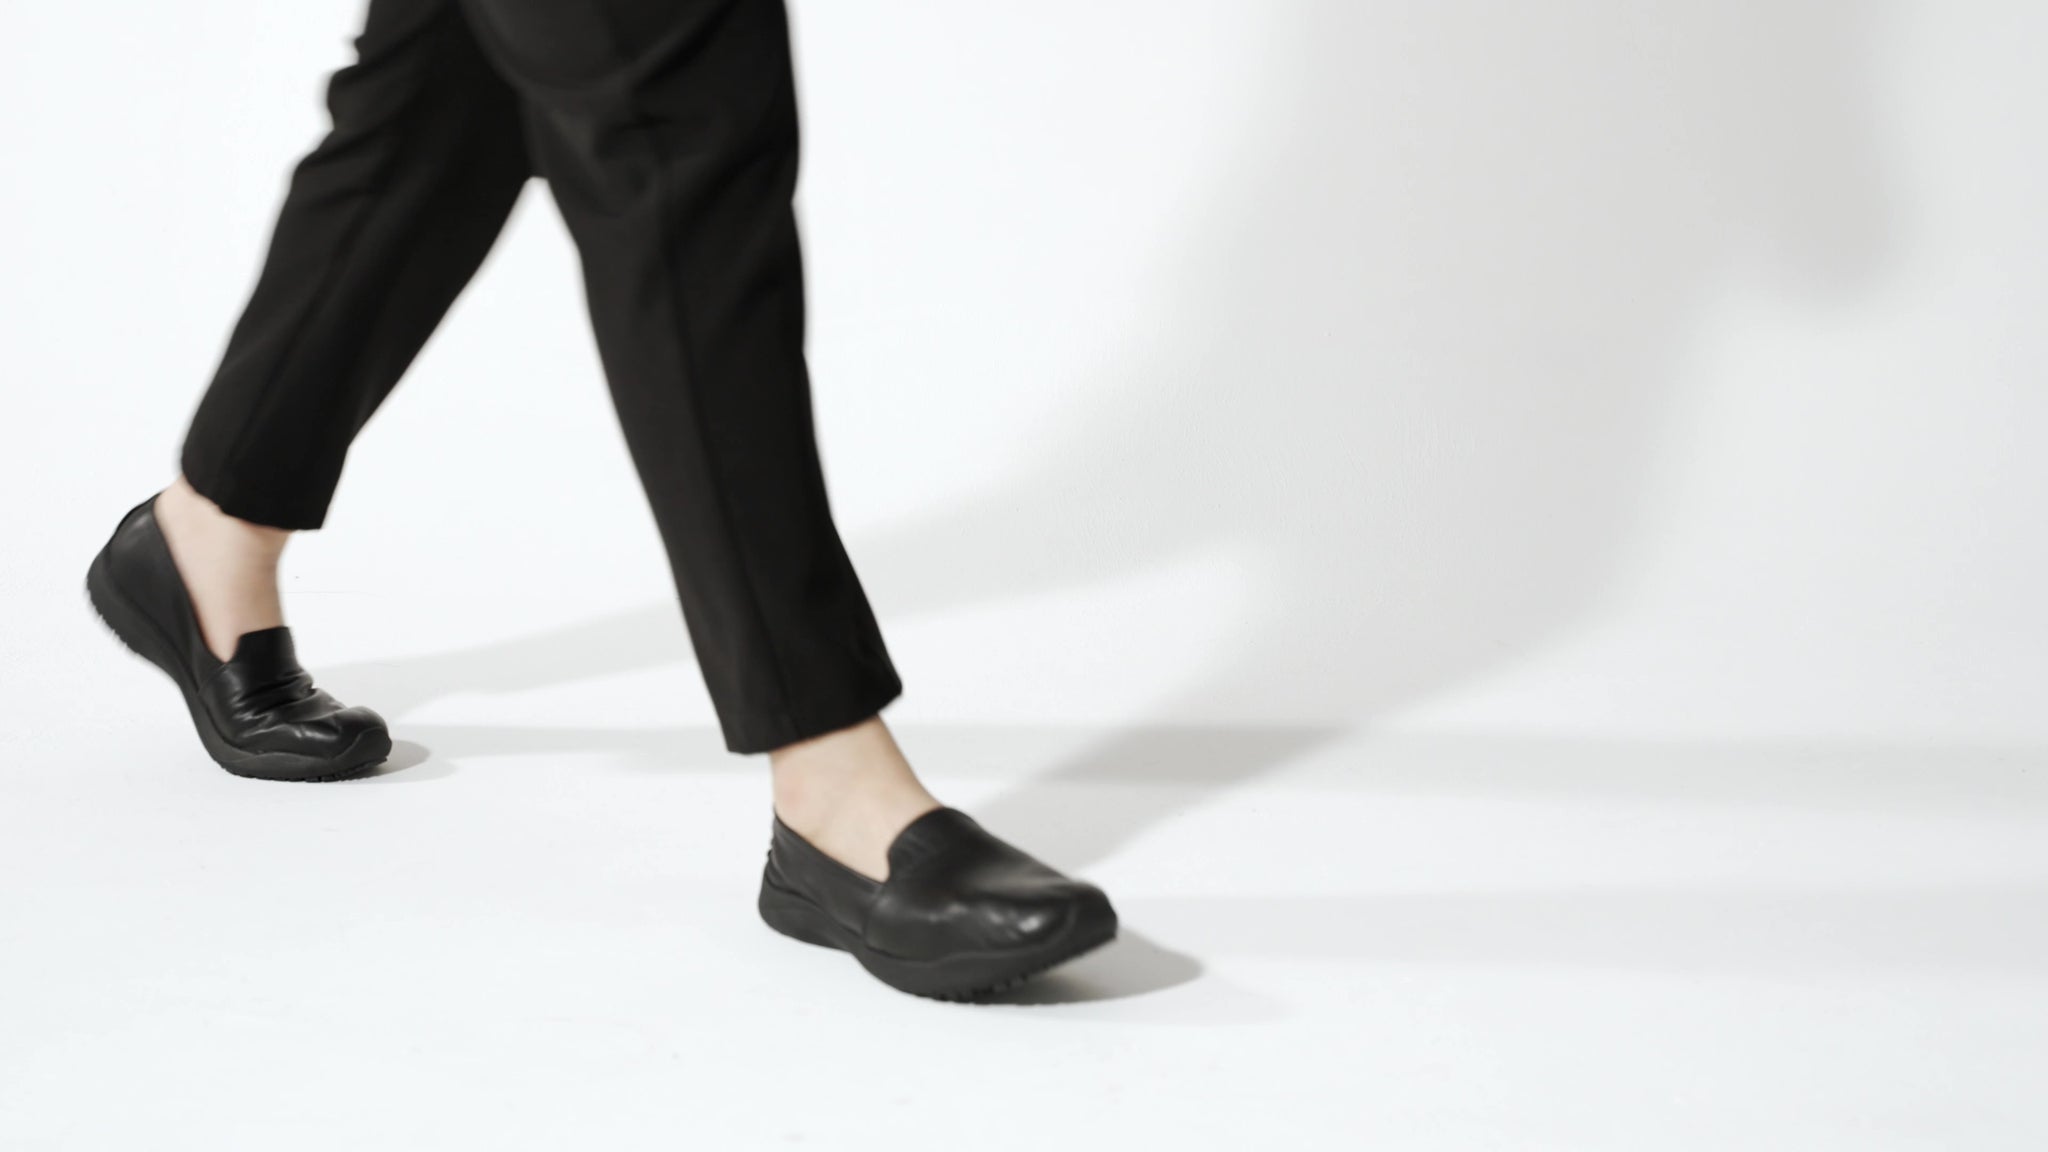 The Jasmine Black by Lila from Shoes for Crews are slip-resistant, casual, lightweight and water-resistant shoes, product video.